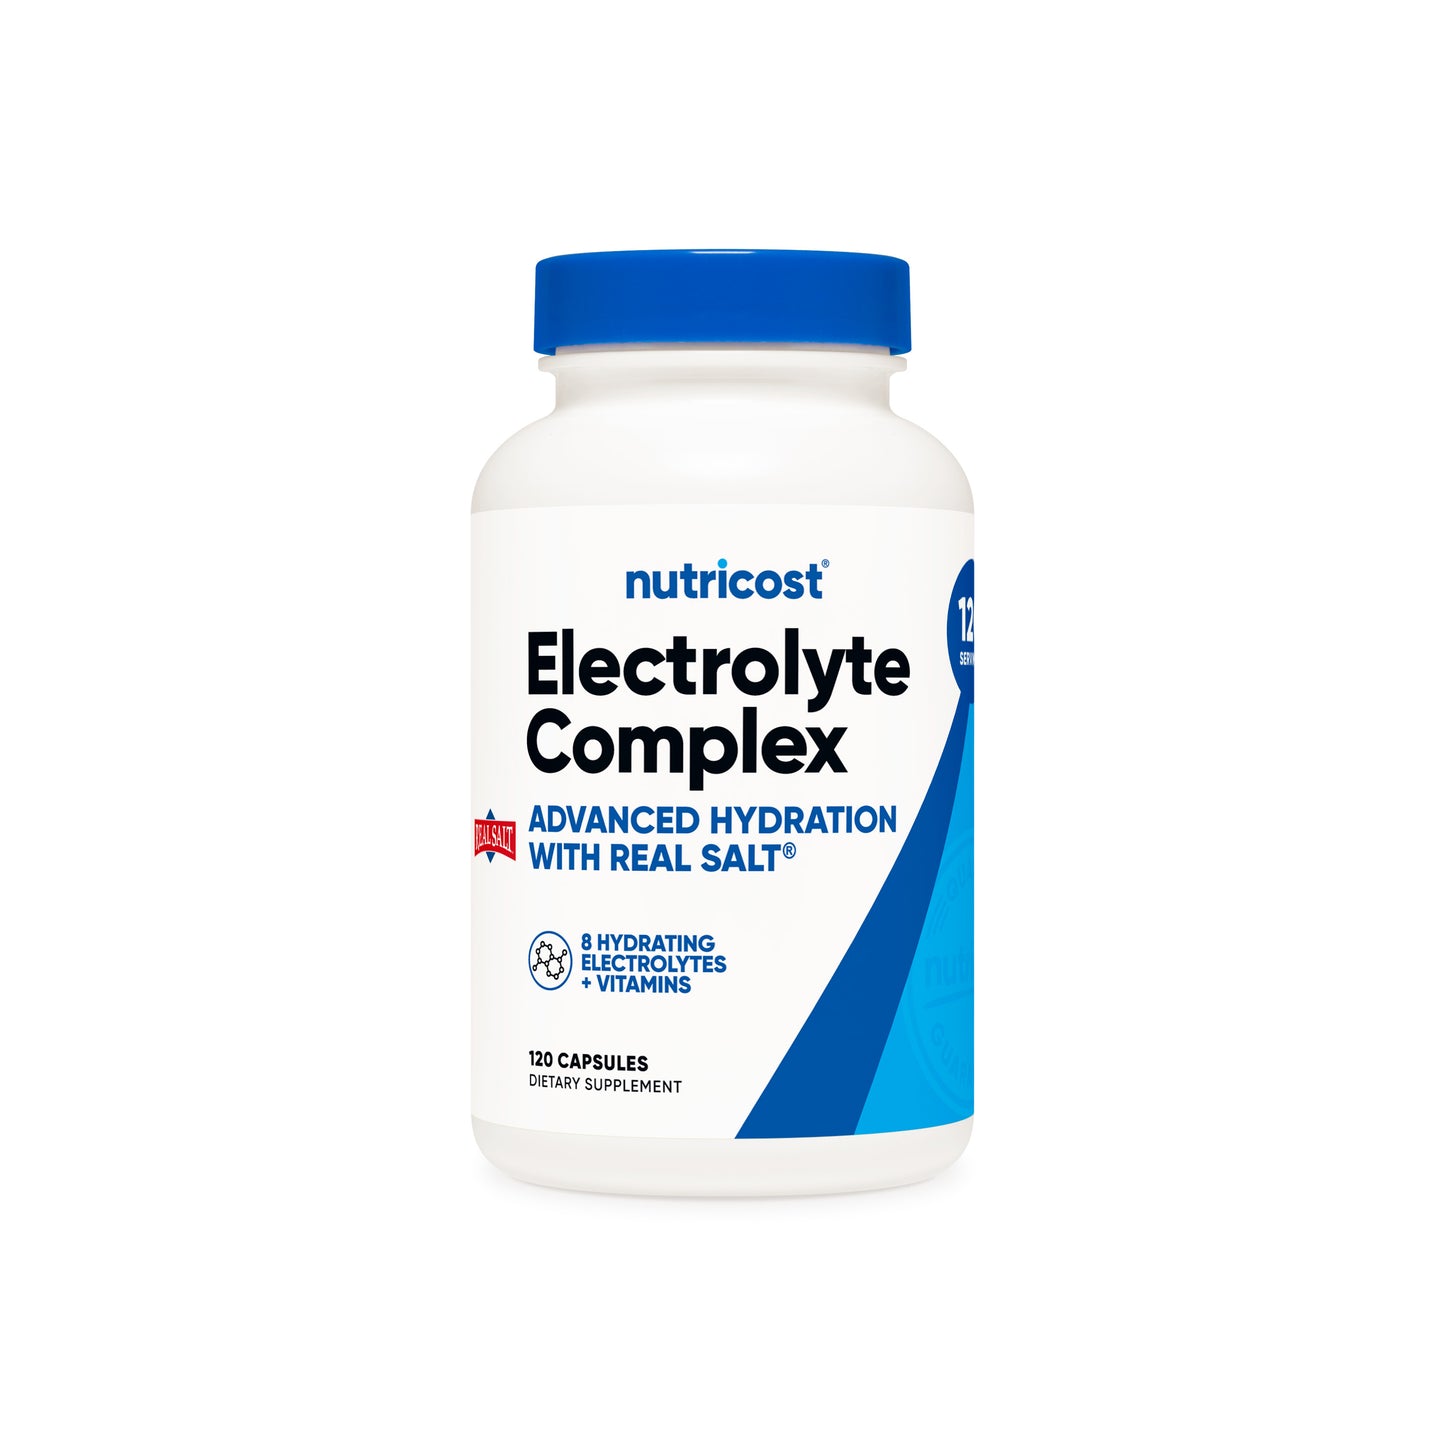 Nutricost Electrolyte Complex